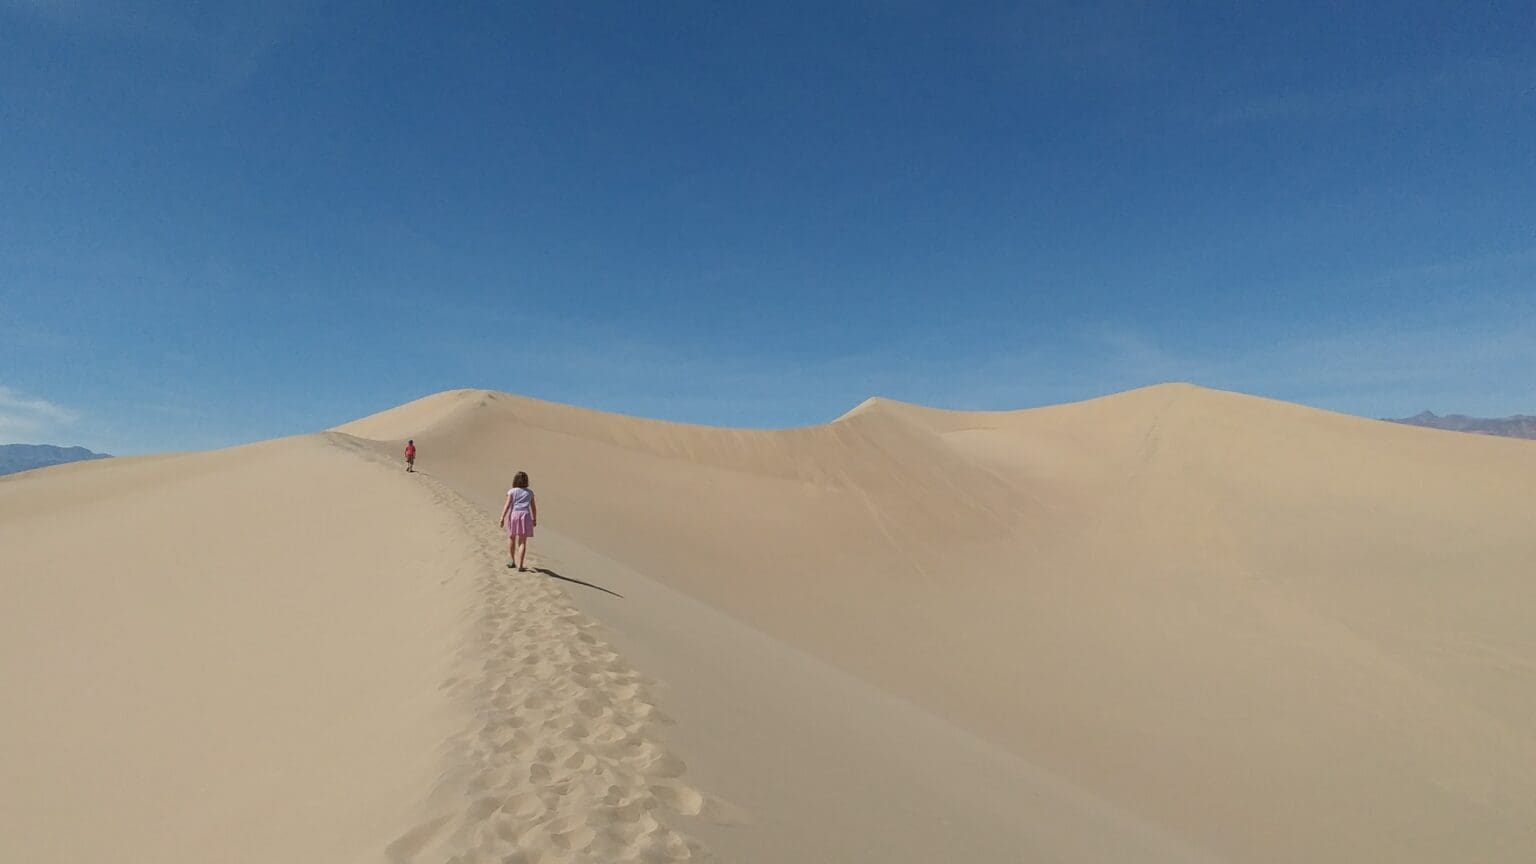 Holly and Caden Martin hike along the sand dune with the bright blue sky above them.